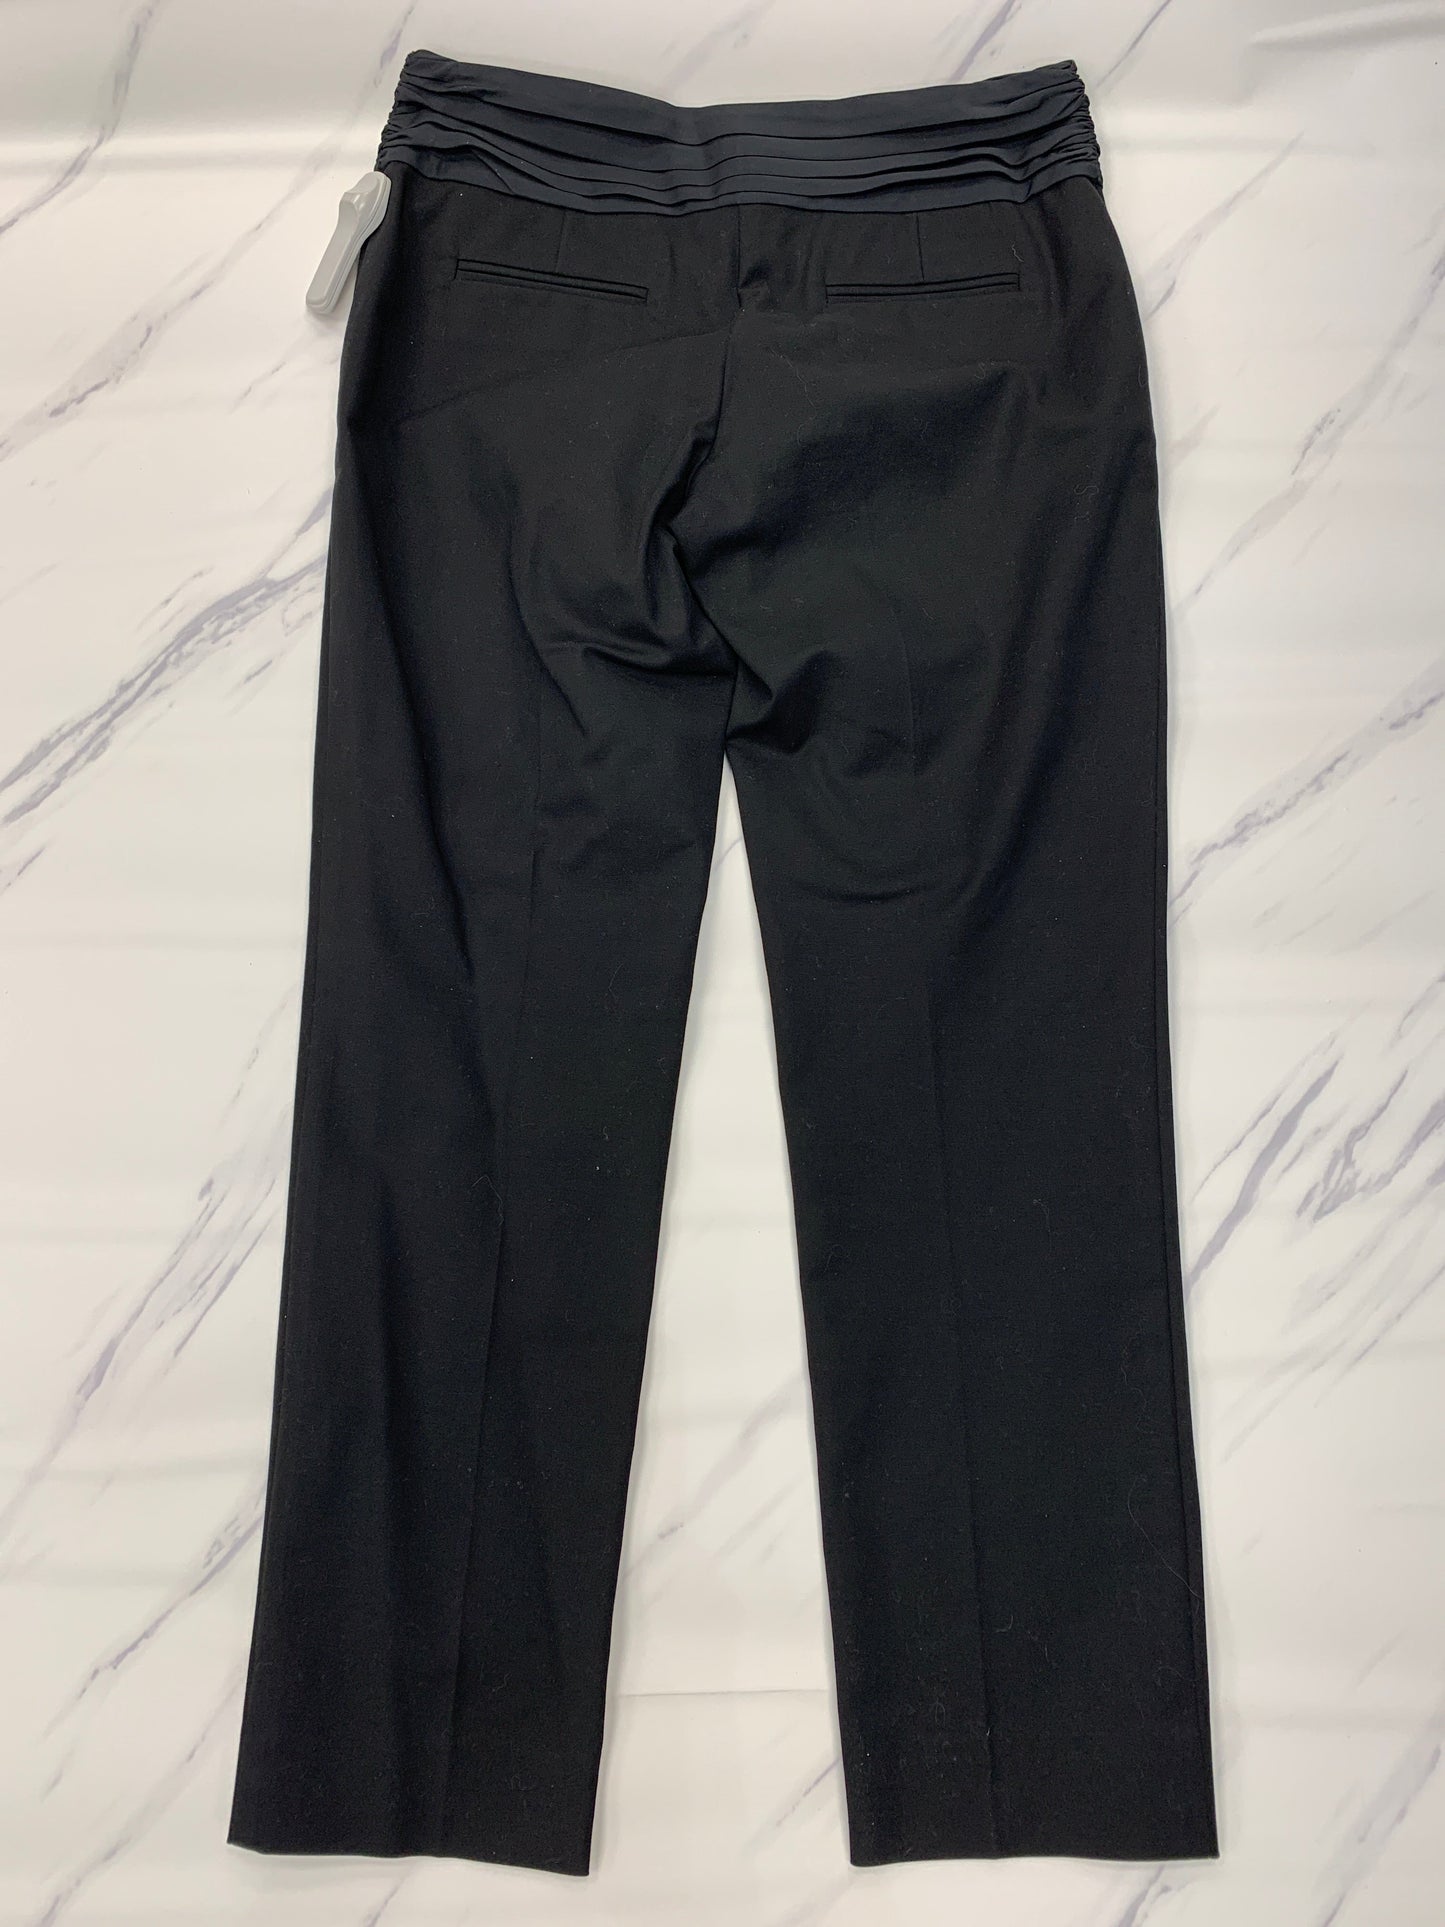 Pants Designer By St John Collection  Size: 6